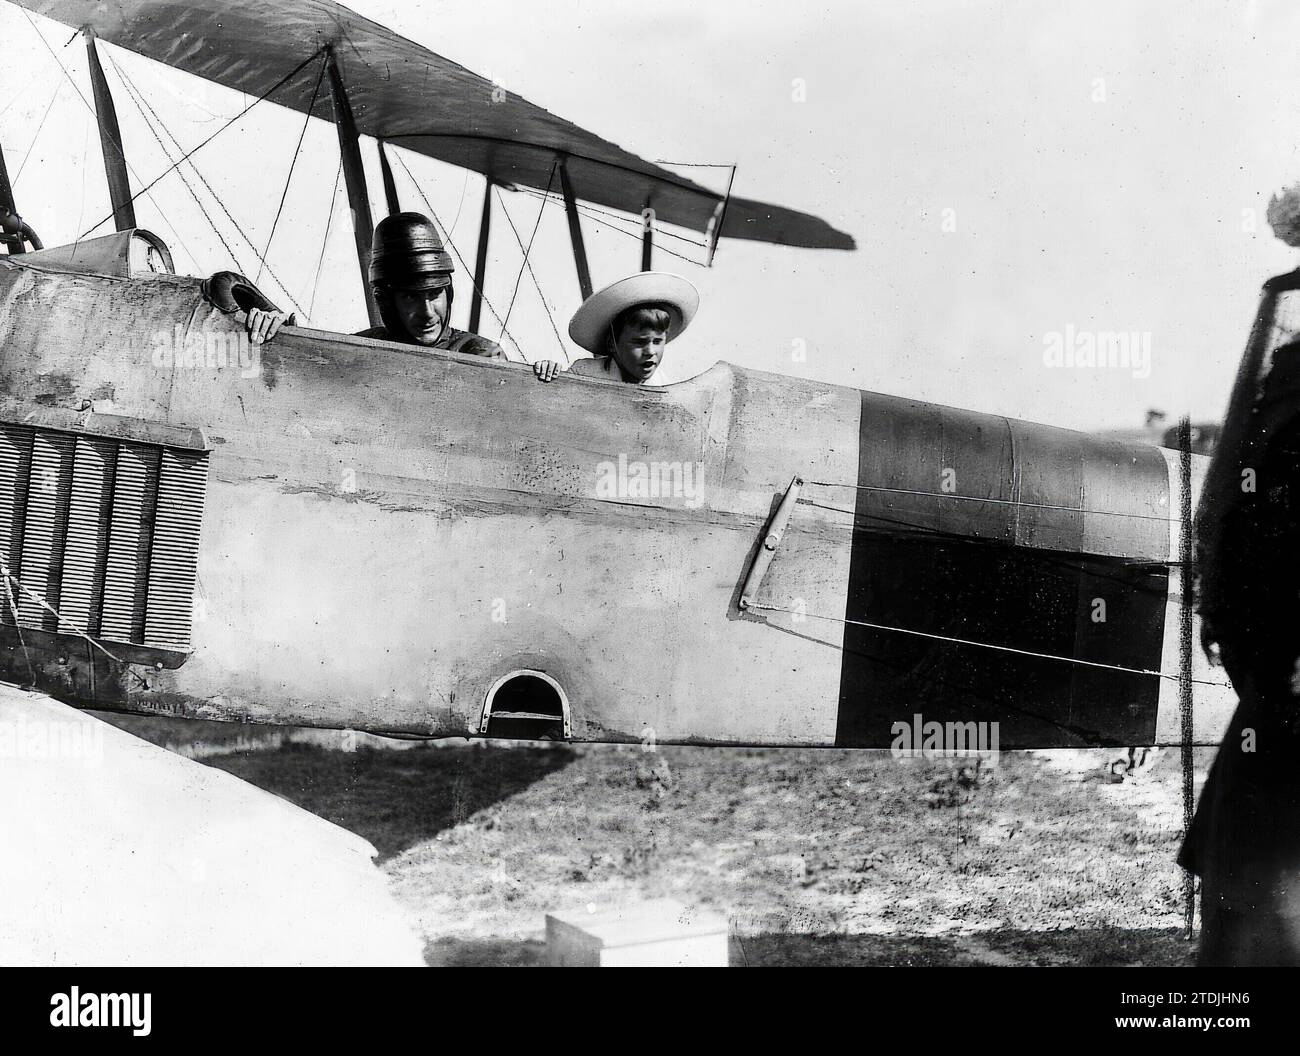 Madrid, 06/17/1915. At the Cuatro Vientos airfield. The infant Don Alfonso and his son the infant Don Álvaro before embarking on the flight they made. Credit: Album / Archivo ABC / Septien Stock Photo